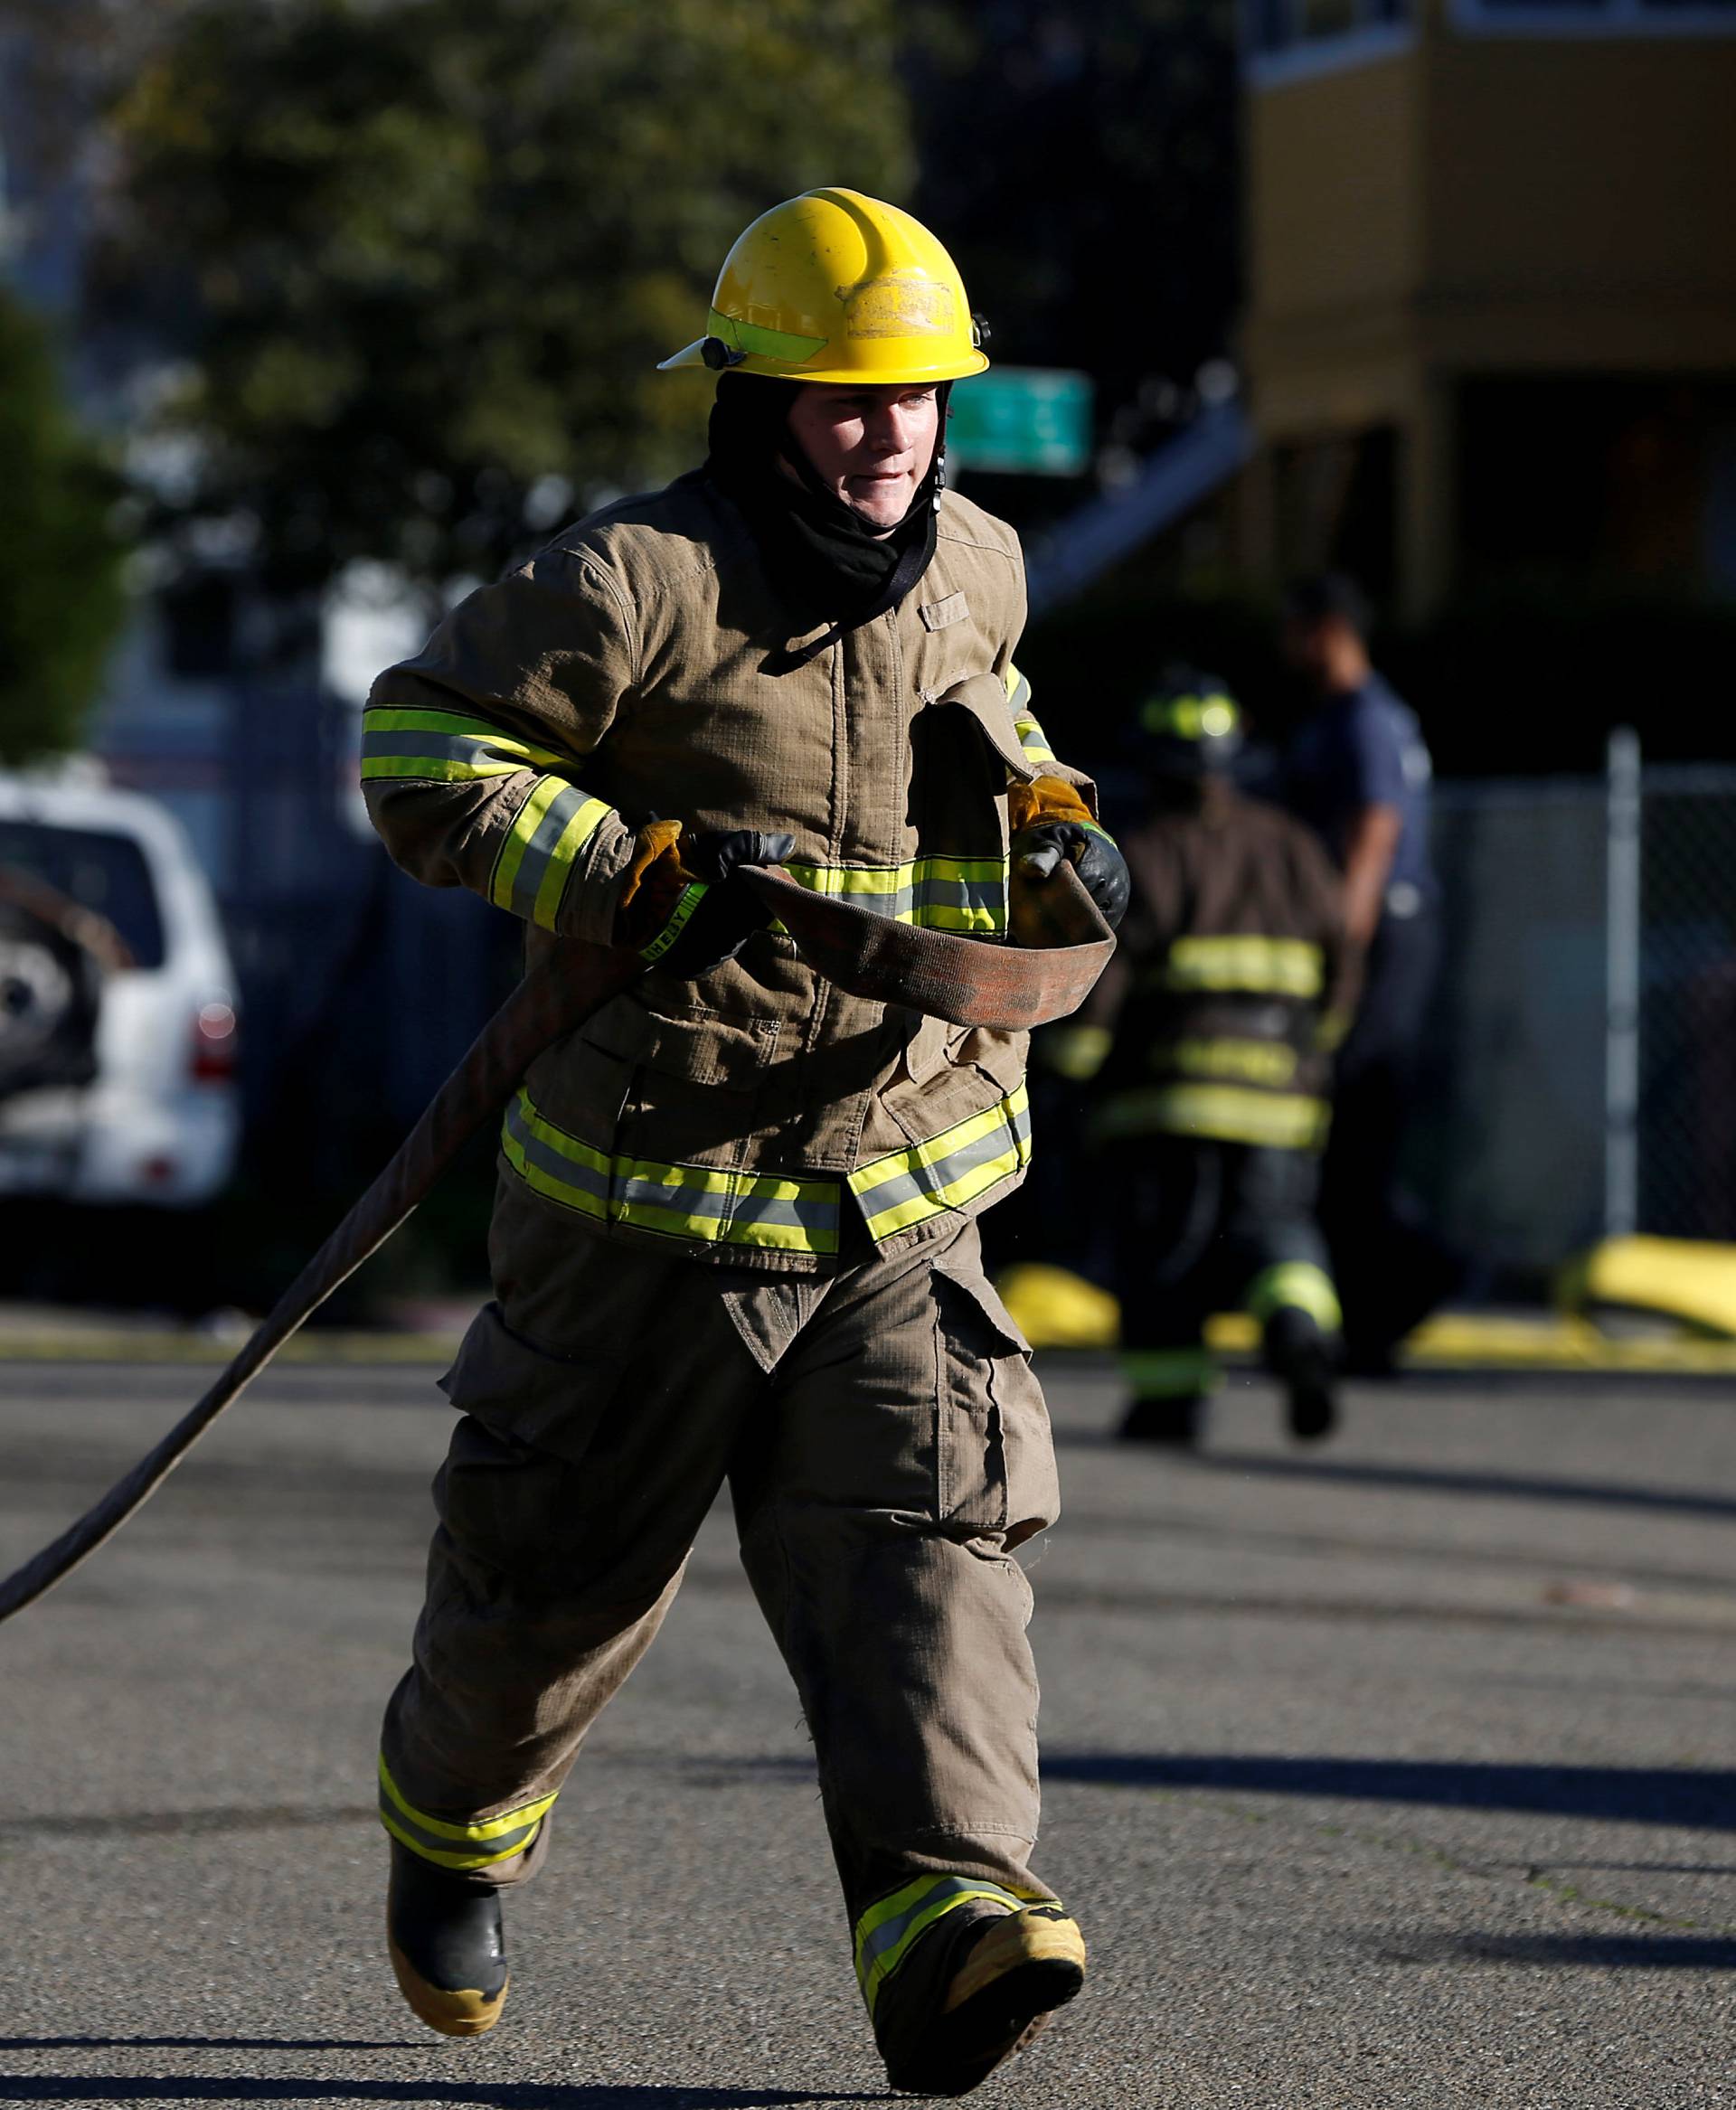 A firefighter carries a water hose near a warehouse where a fire broke out during an electronic dance party late Friday evening, resulting in at least nine deaths and many unaccounted for in the Fruitvale district of Oakland